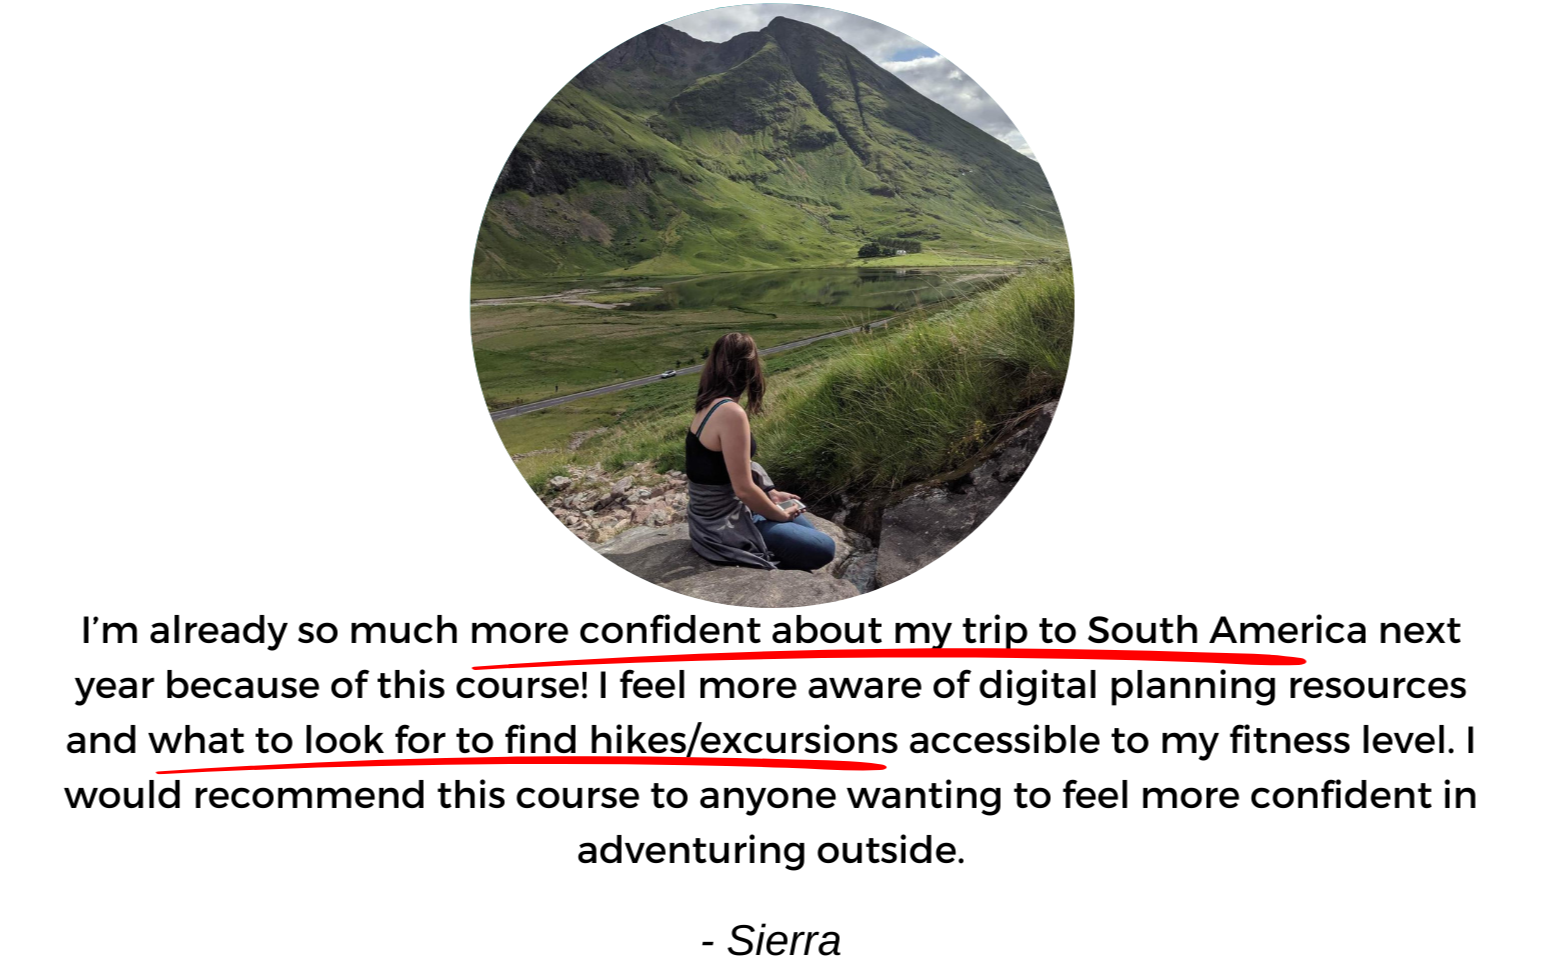 Testimonial: I&#39;m so much more confident about my trip to South America next year because of this course I feel more aware digital planning resources and want to look forward to find hikes excursions accessible to my fitness level. I would recommend the scores to anyone wanting to feel more confident in adventuring outside.